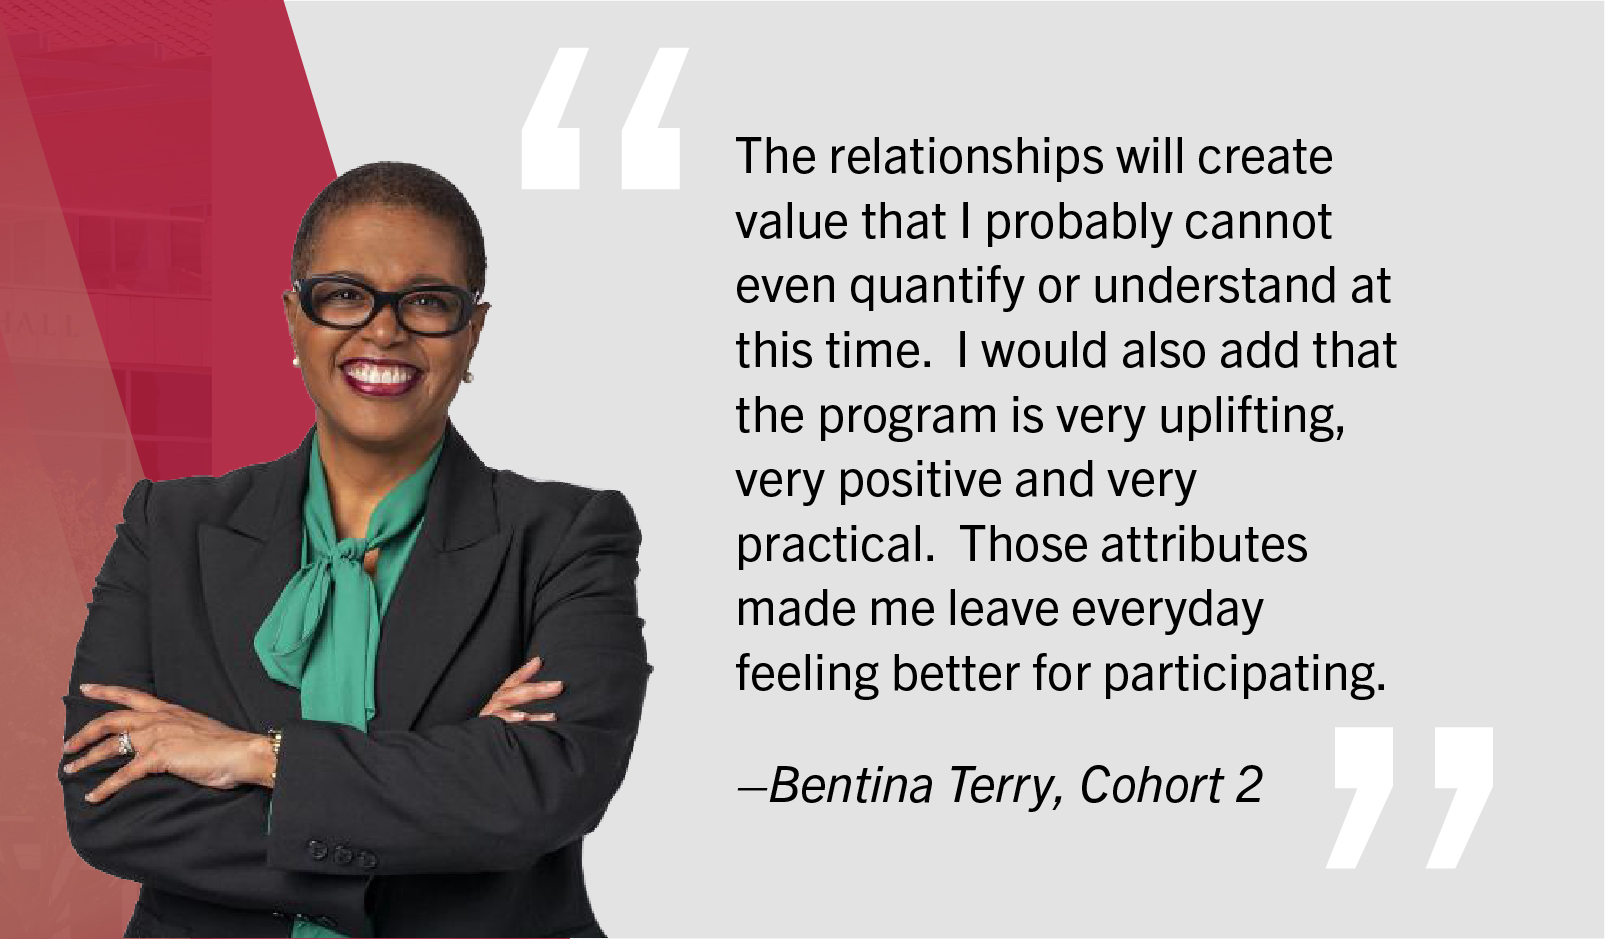 Quote by Bentina Terry, Cohort 2